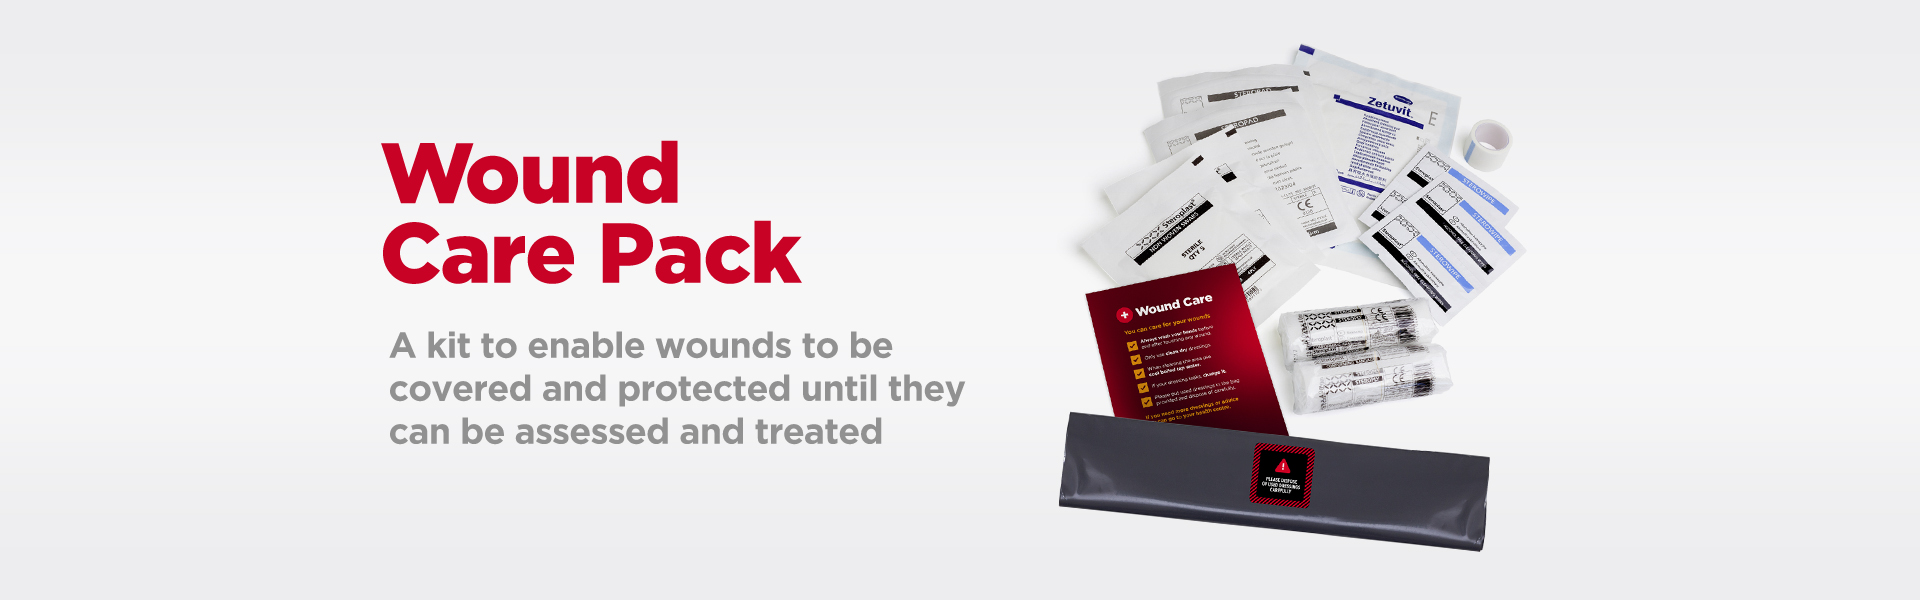 Wound Care Pack